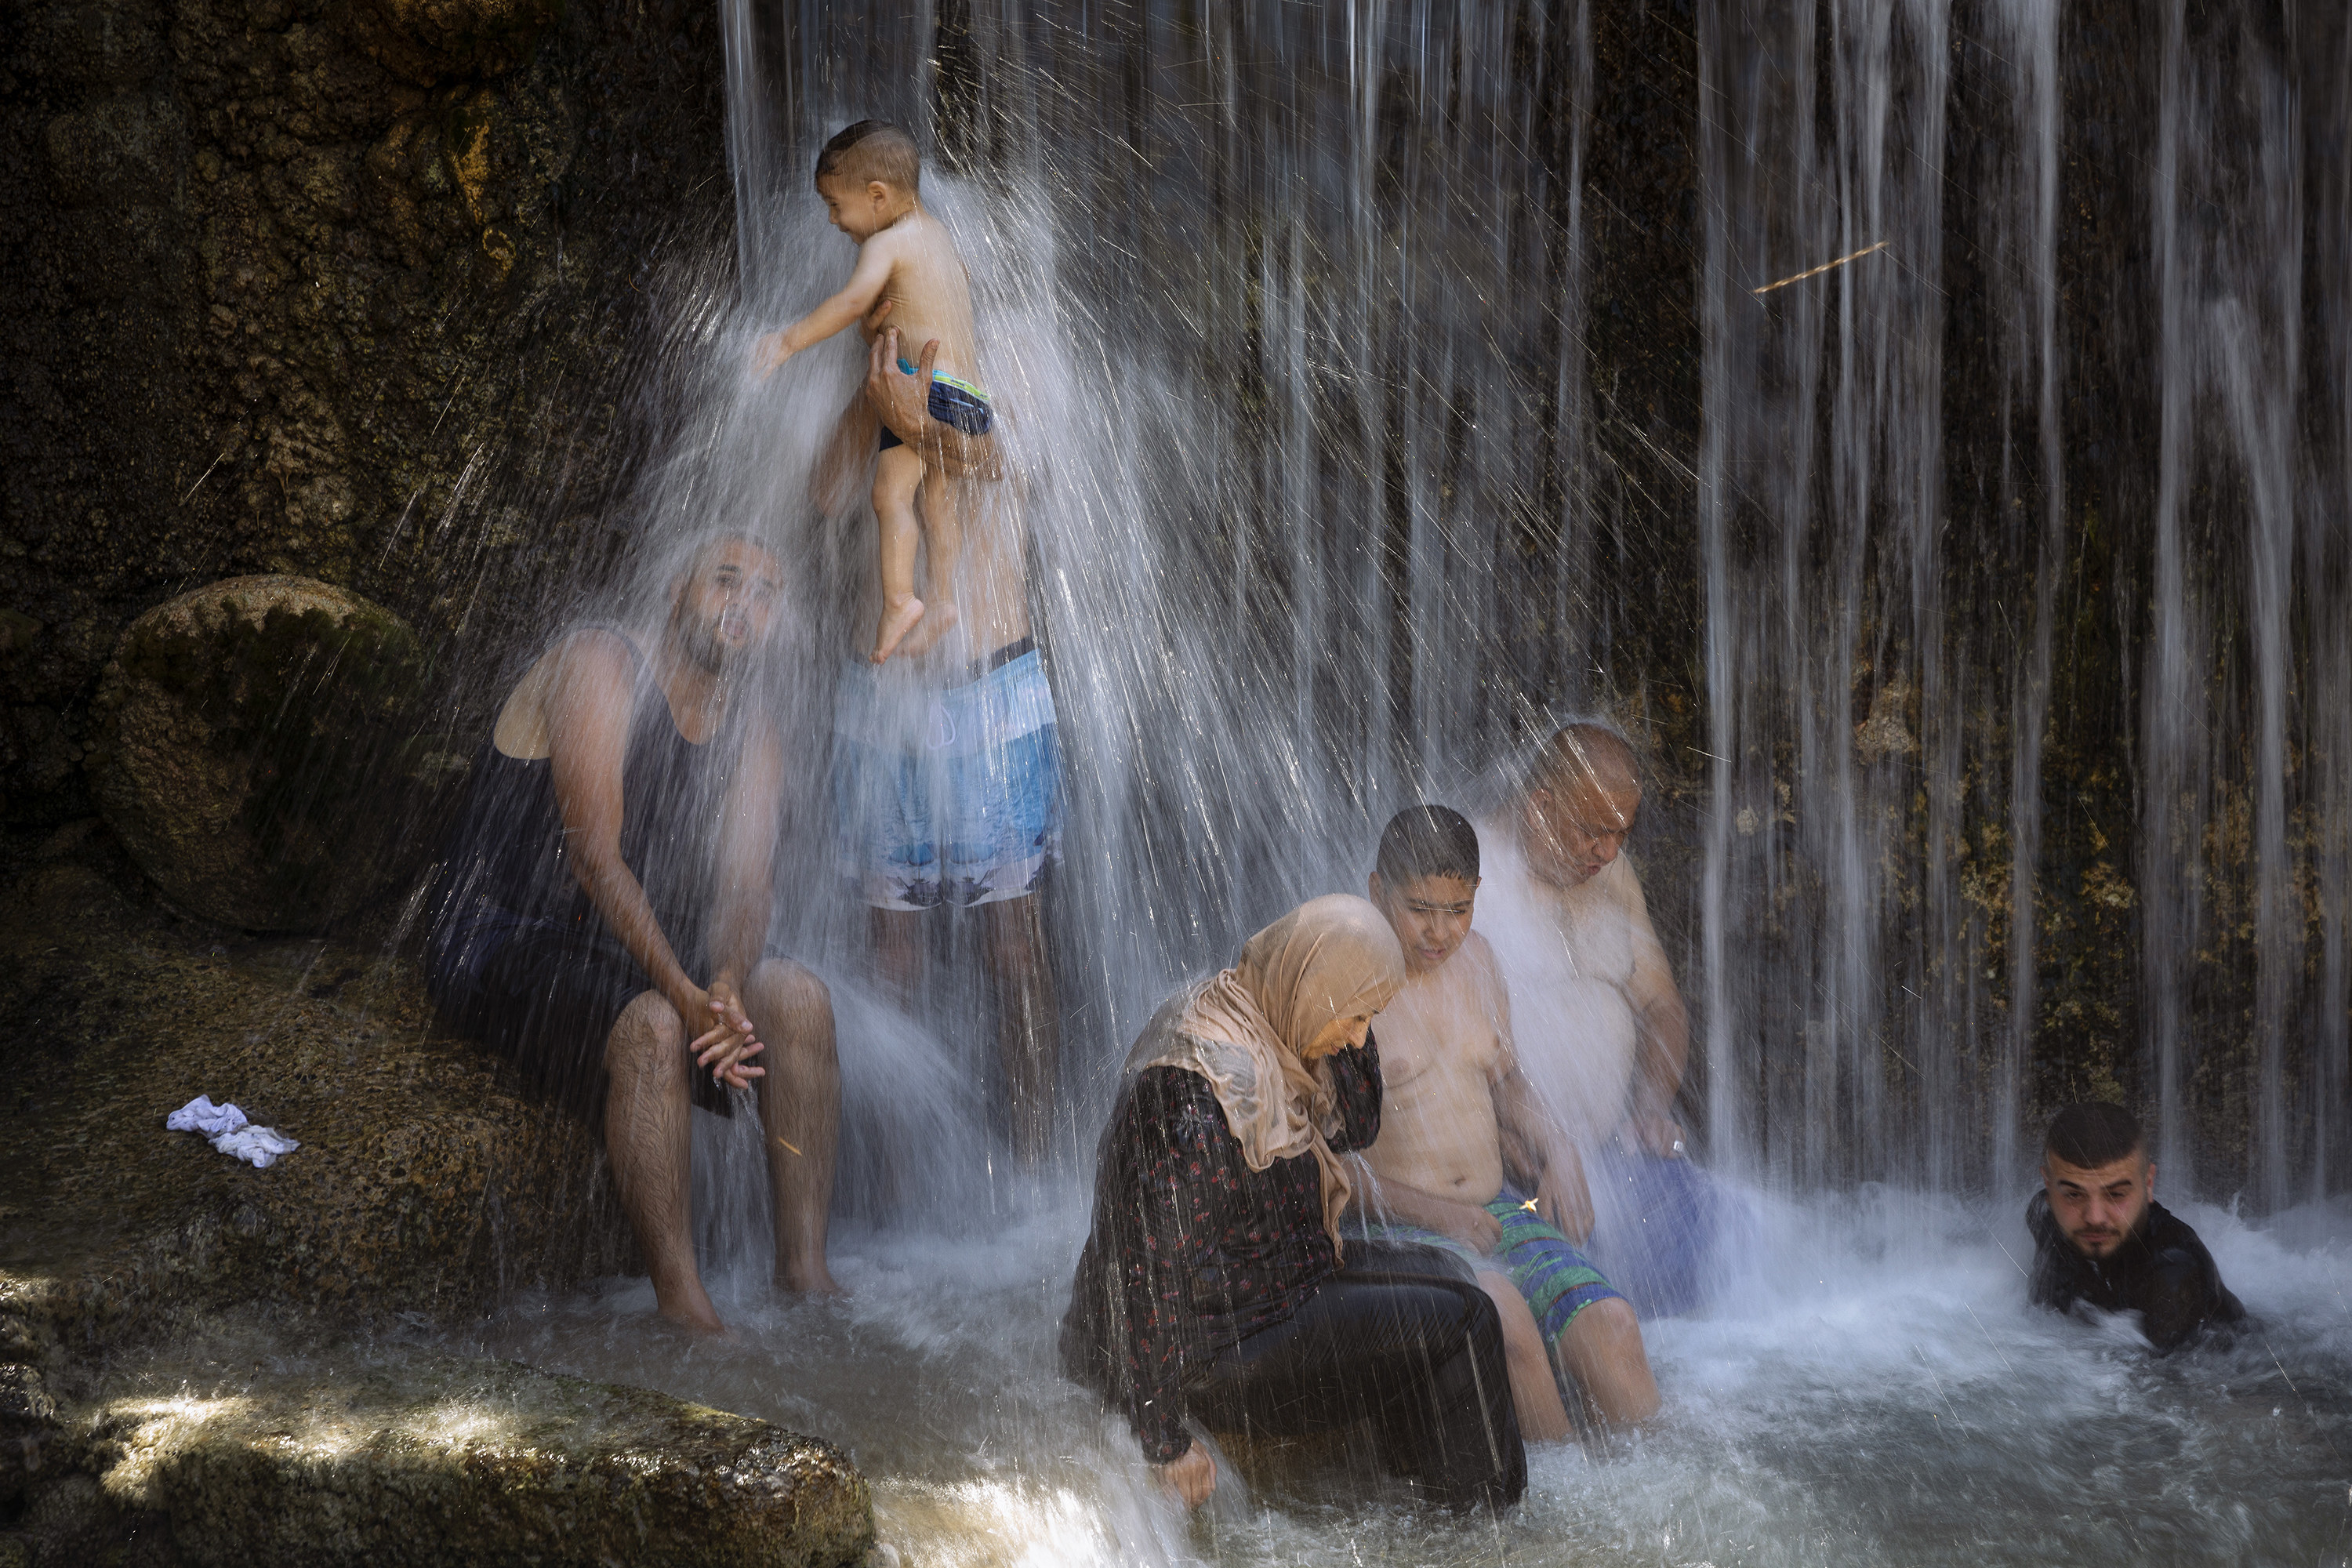 A man holds a baby under the waterfall as other people sit nearby